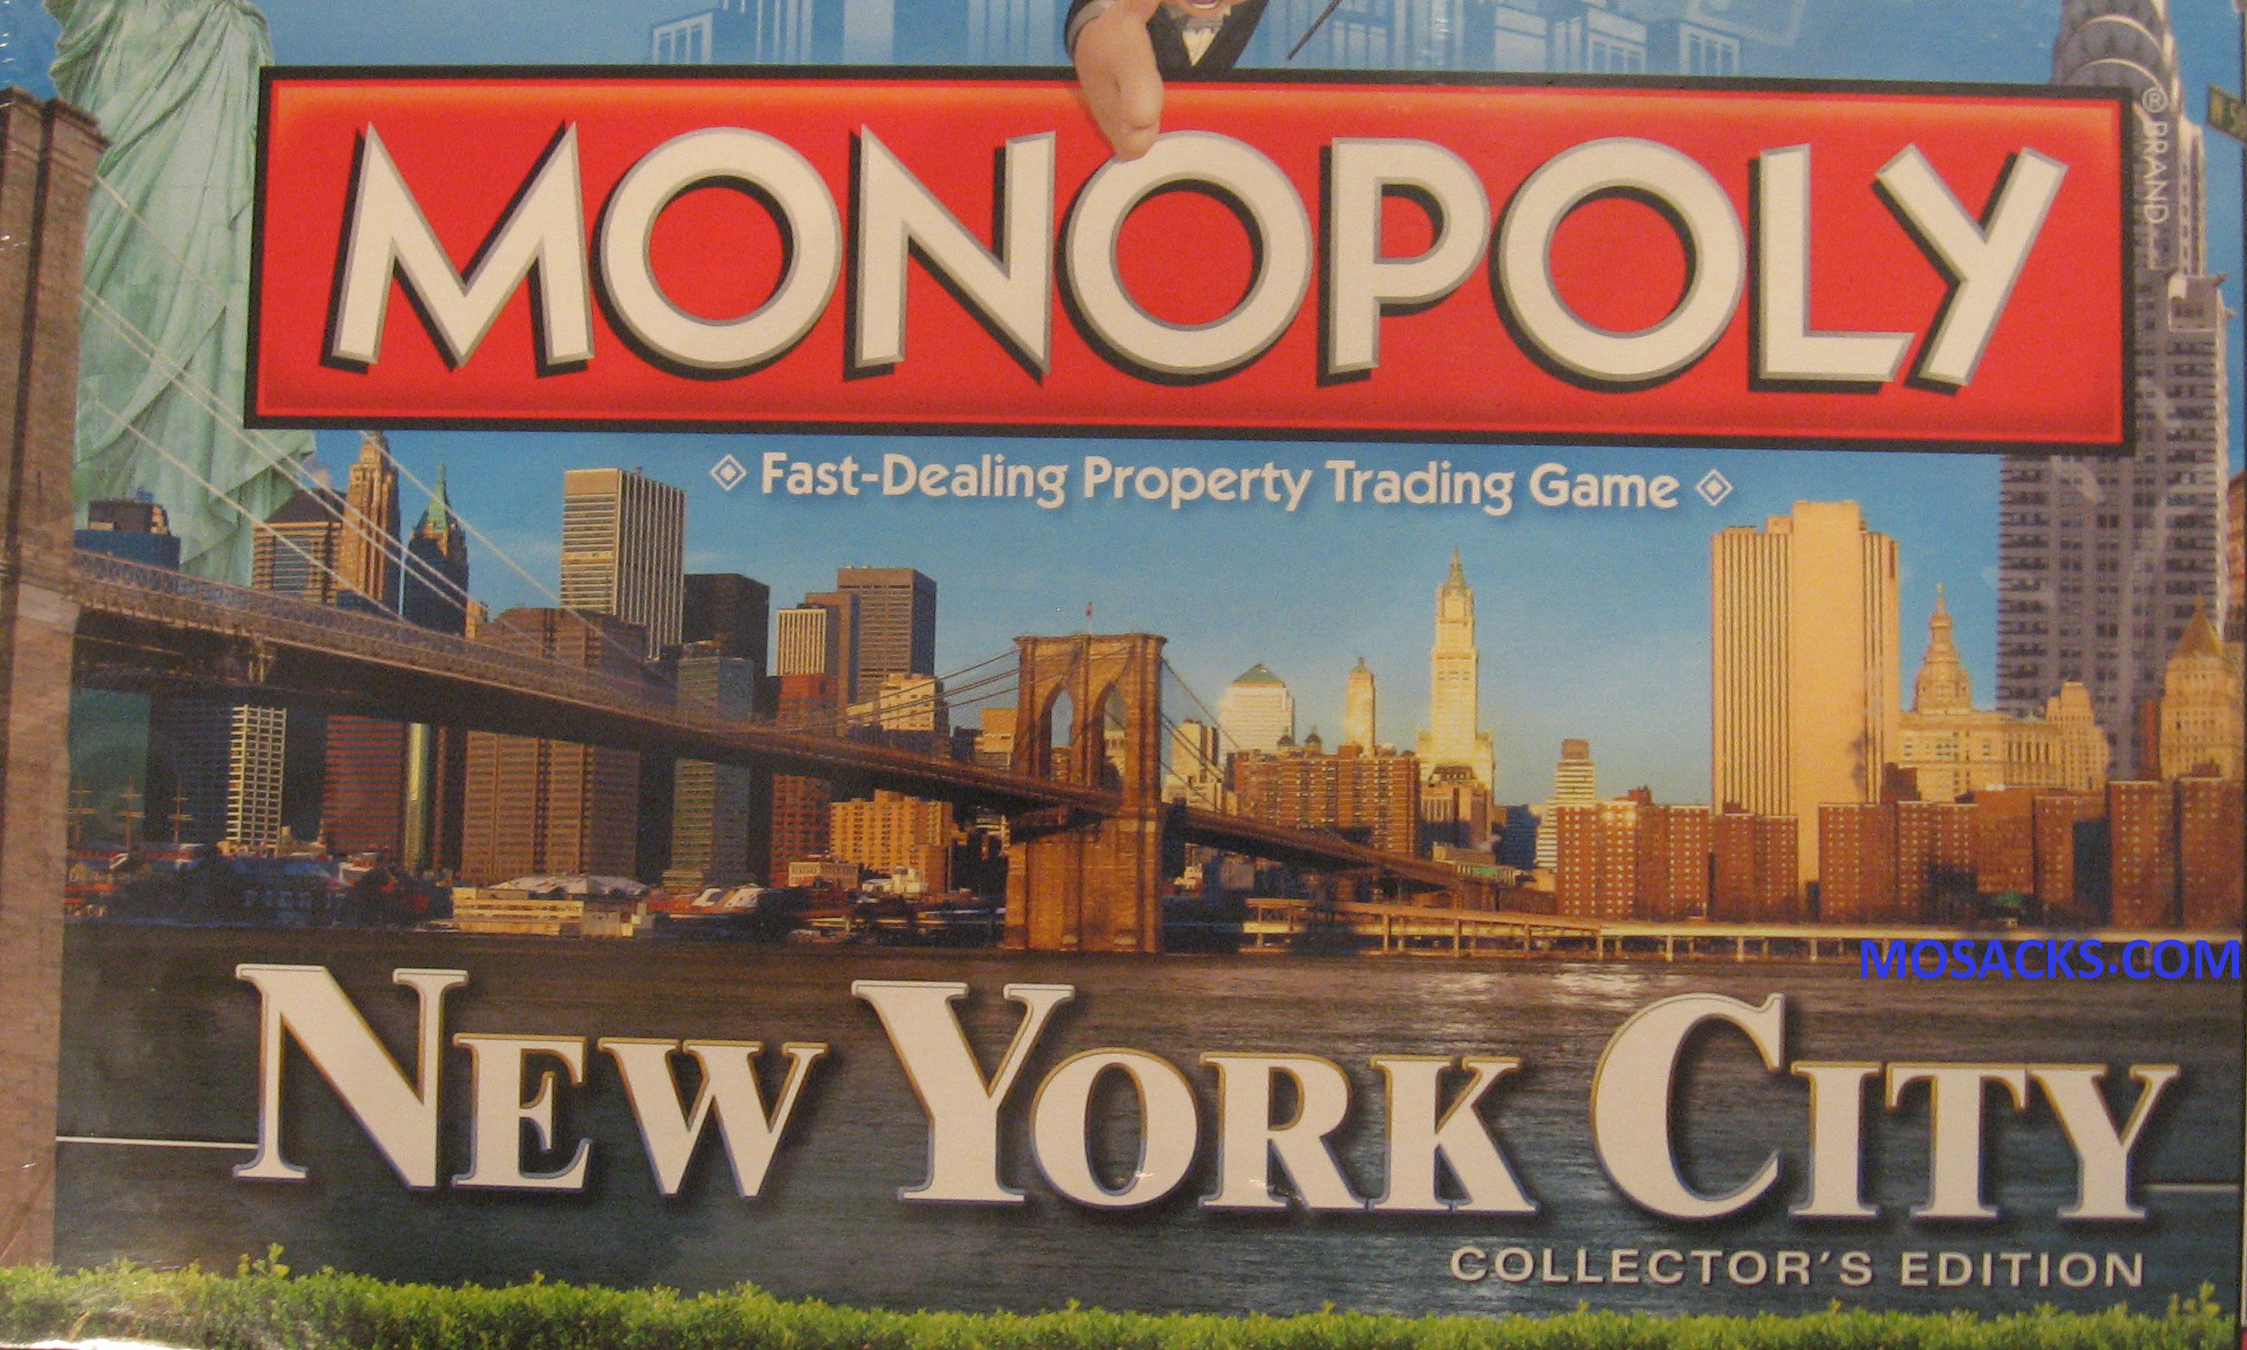 New York City Collector's Edition of Monopoly 108-0700304043368